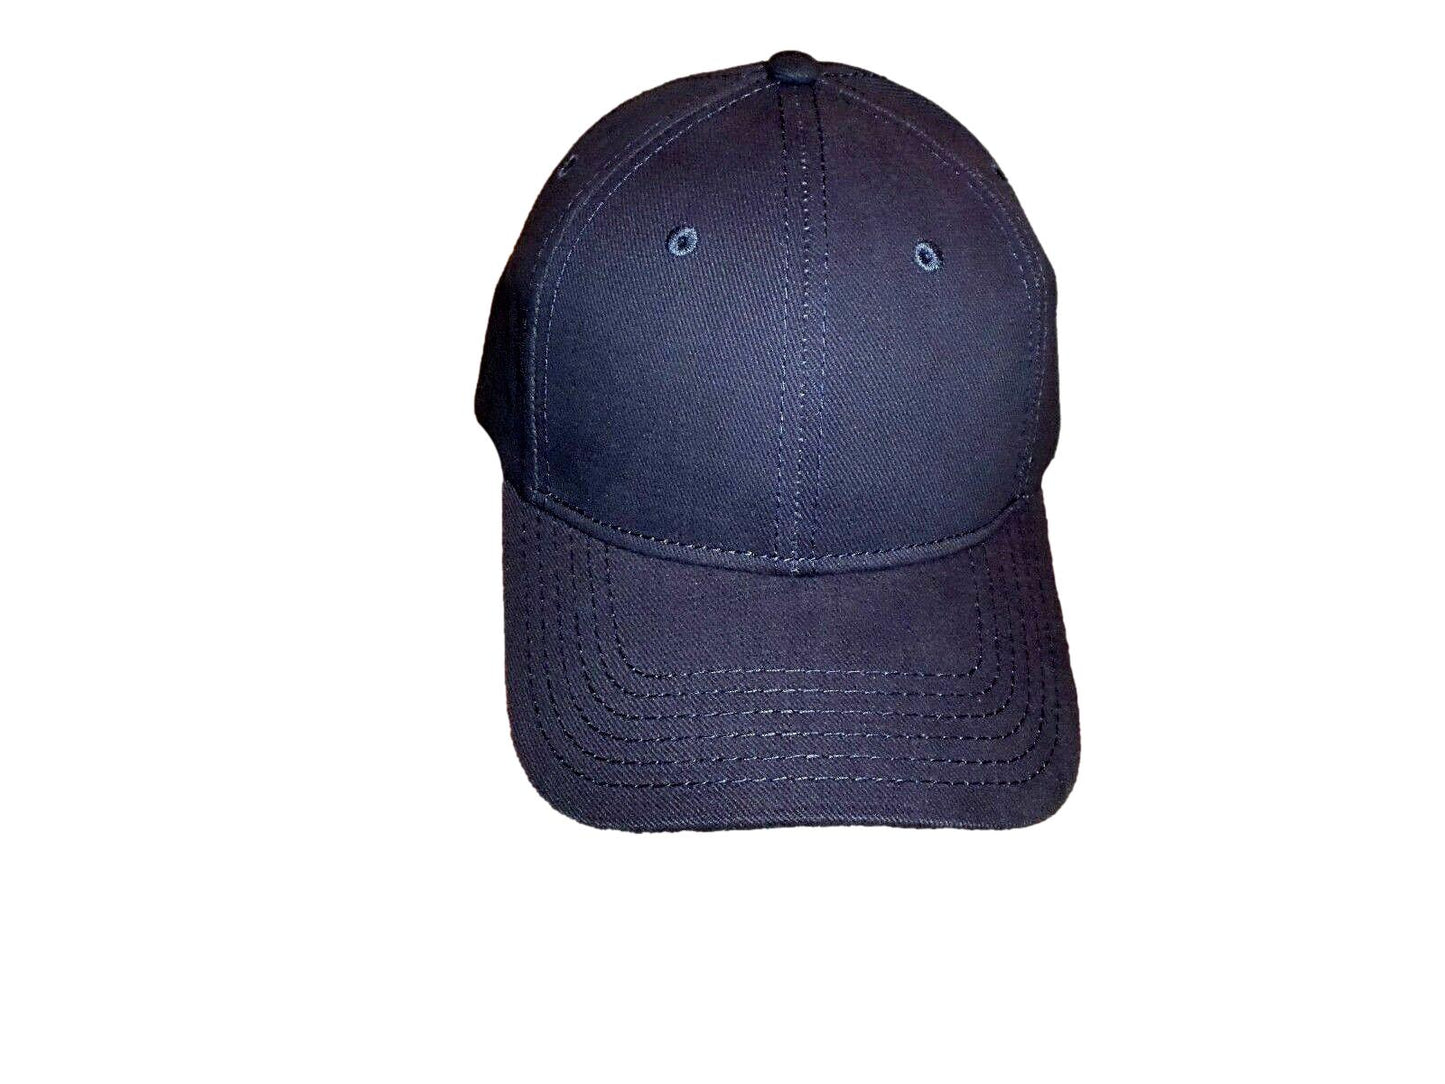 NAVY BLUE HAT BALL CAP BRUSHED COTTON LOW PROFILE NEW